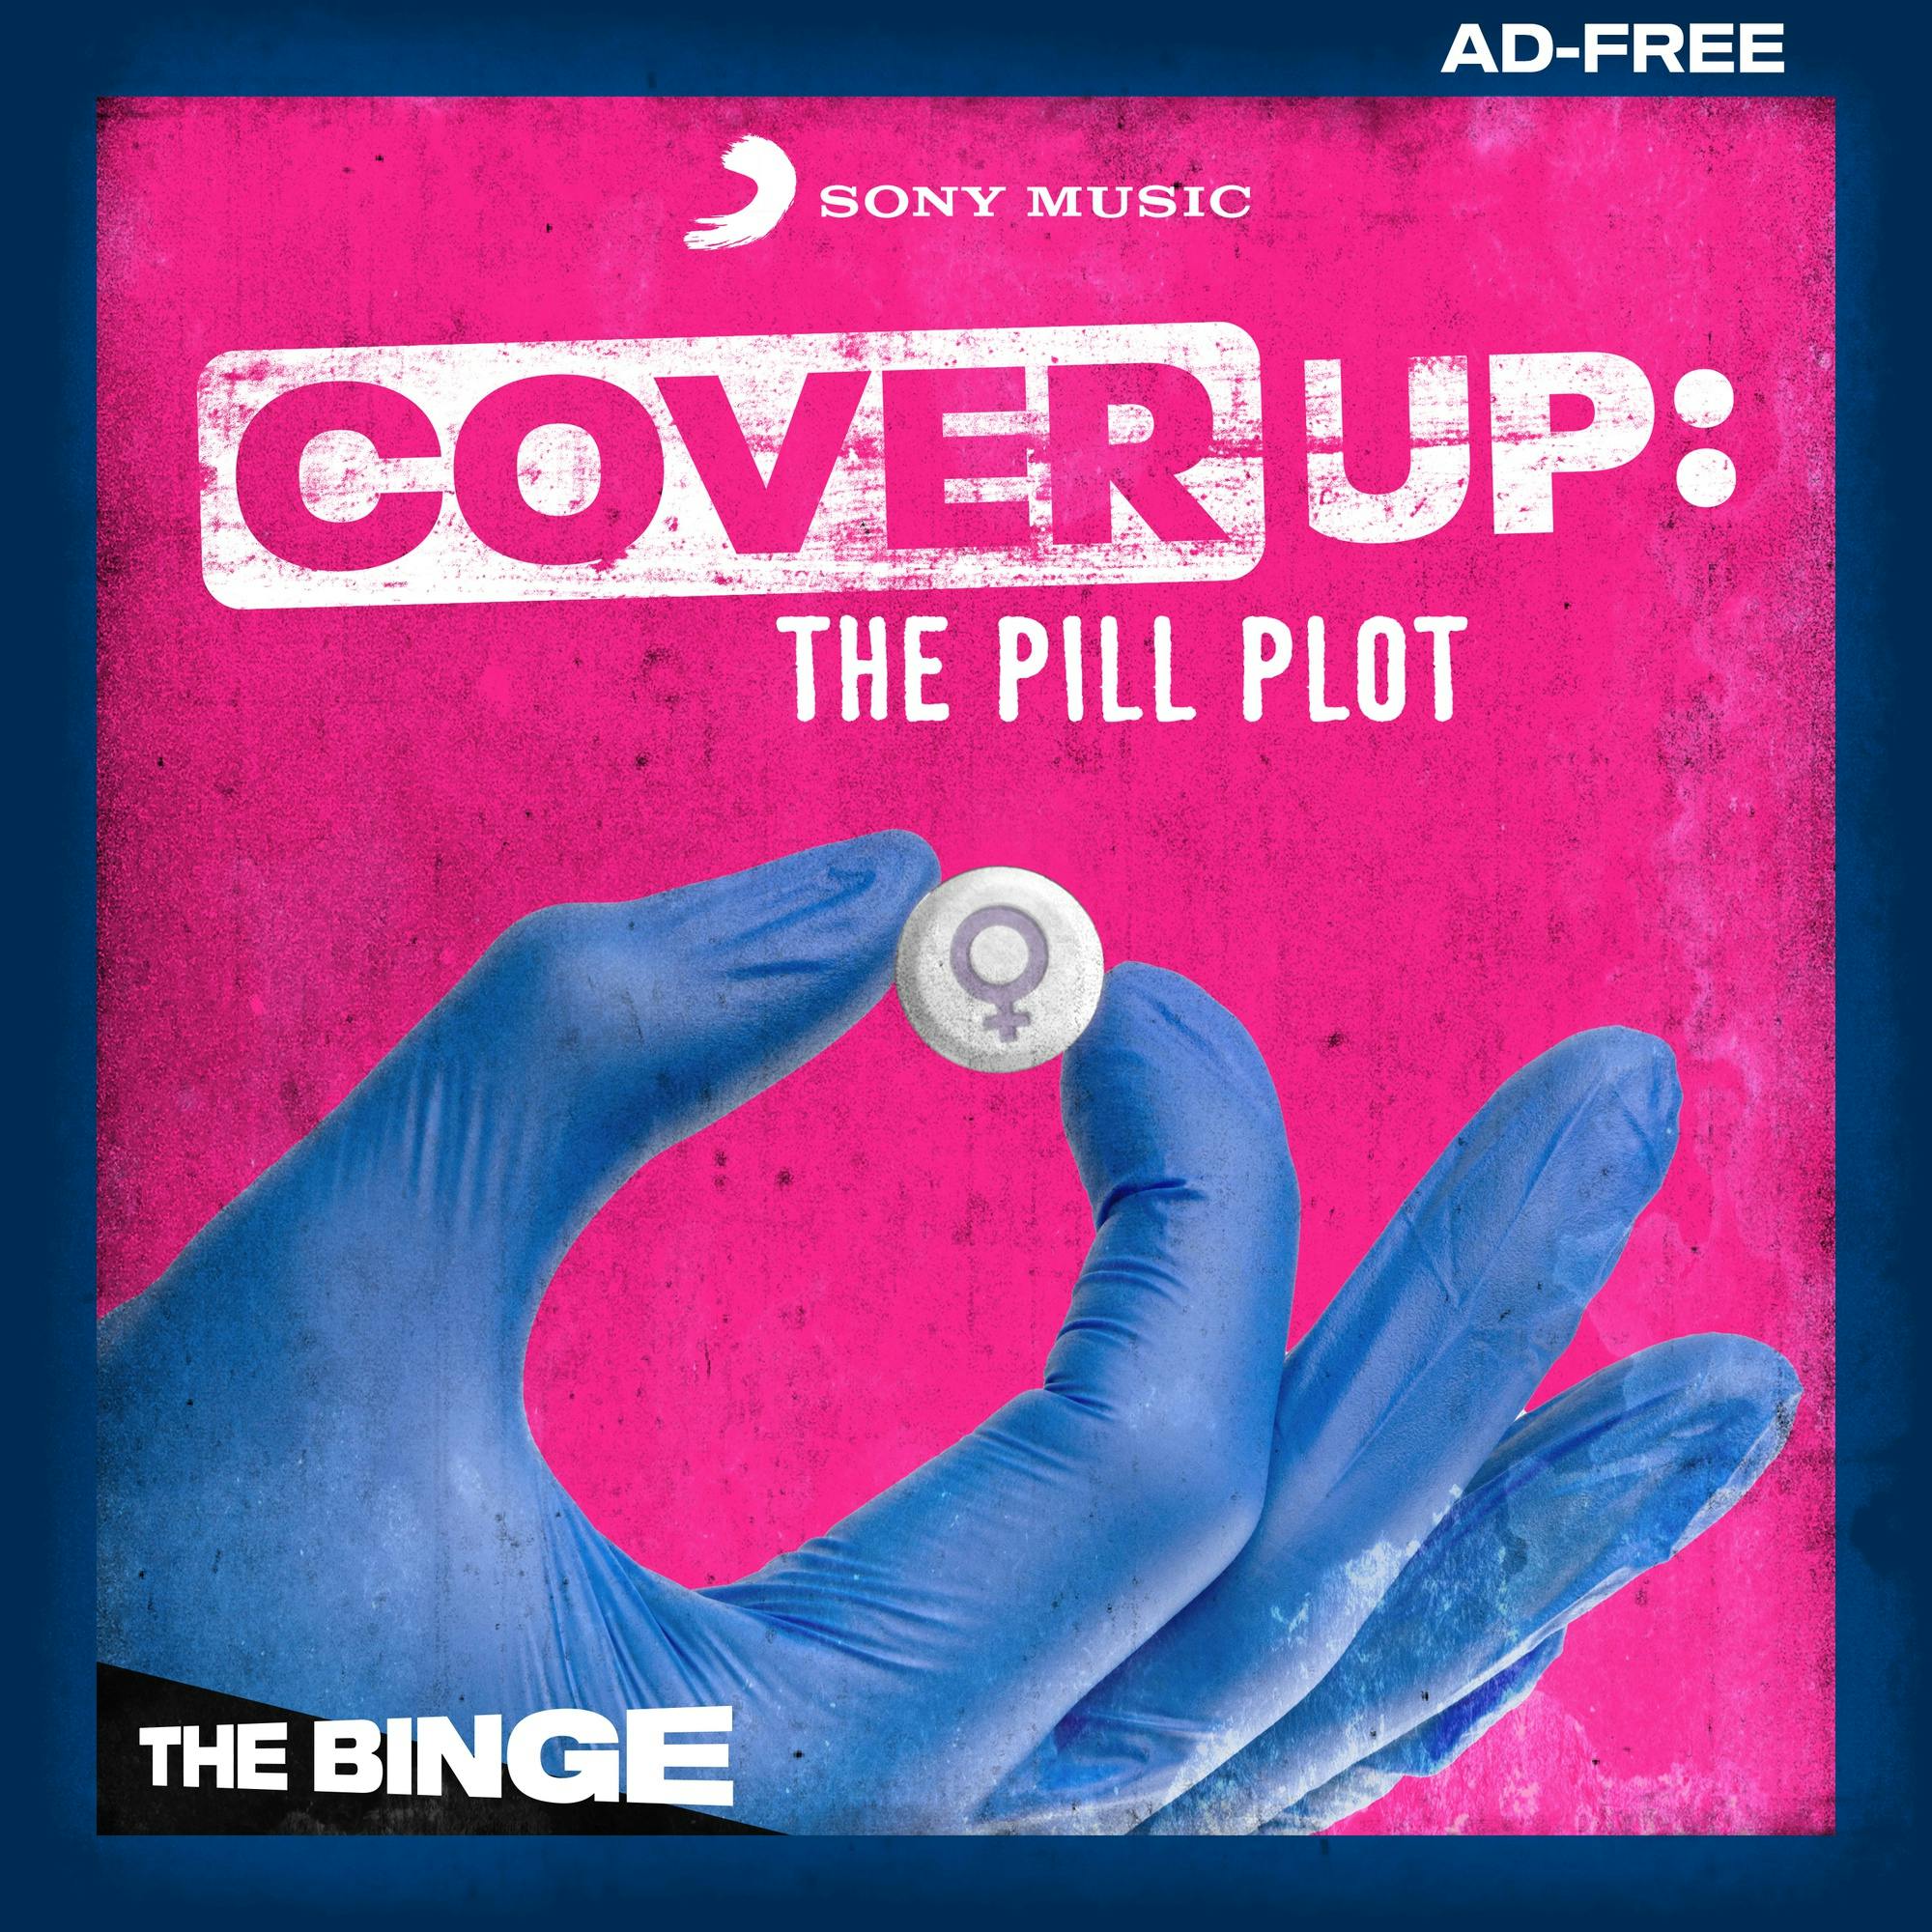 Cover Up: The Pill Plot (Ad-Free, THE BINGE) podcast tile